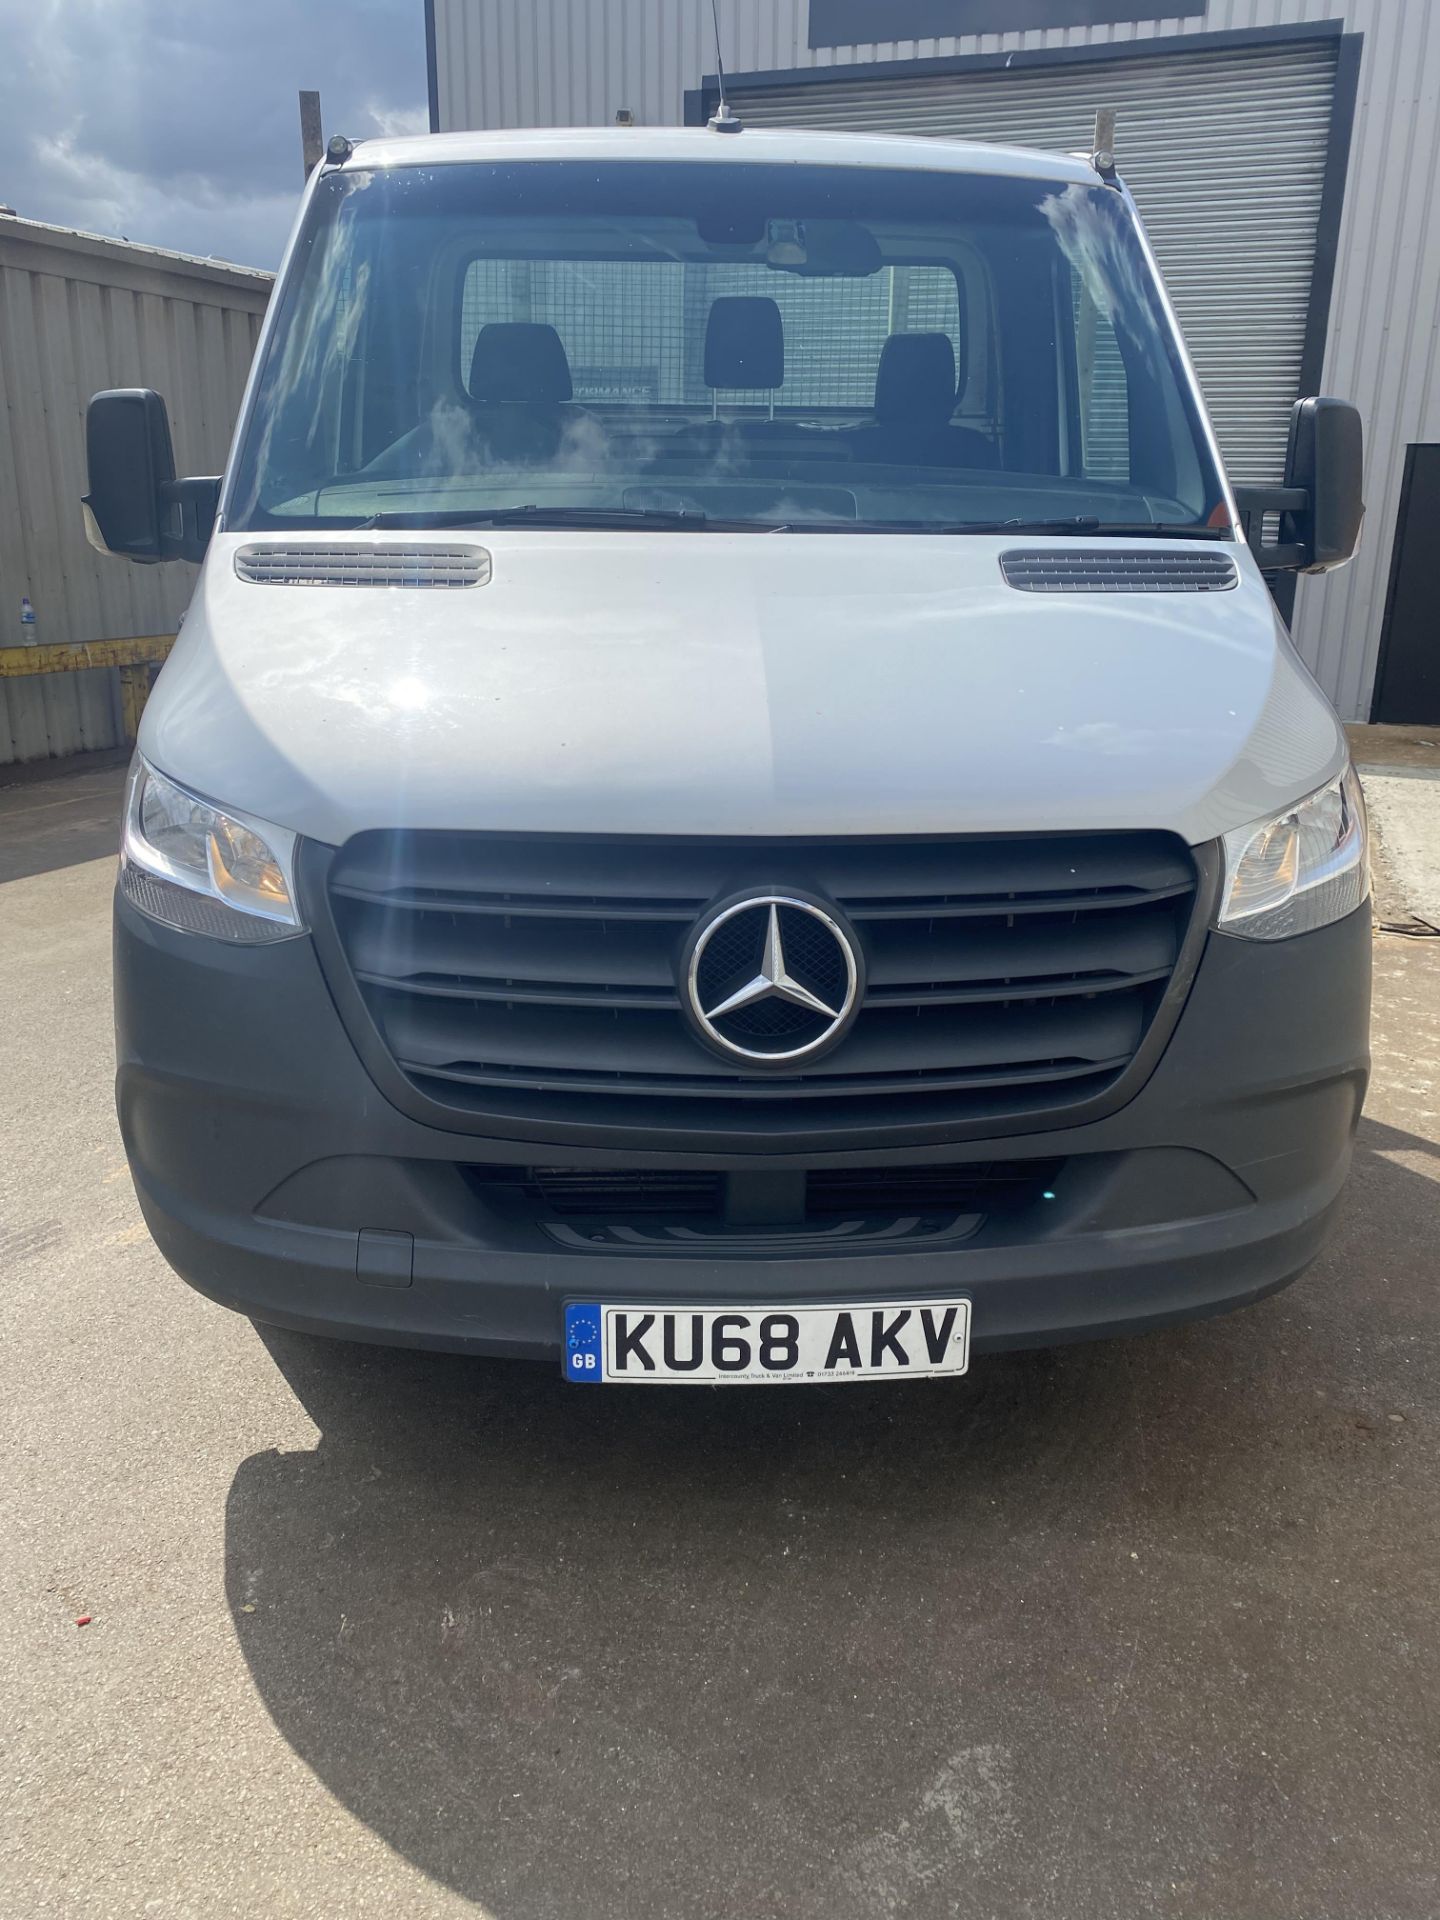 2018 MERCEDES BENZ SPRINTER 316 2.1 CDI L3 DIESEL RWD 3.5T CHASSIS CAB ALUMINIUM FLAT EXTRA LONG - Image 2 of 25